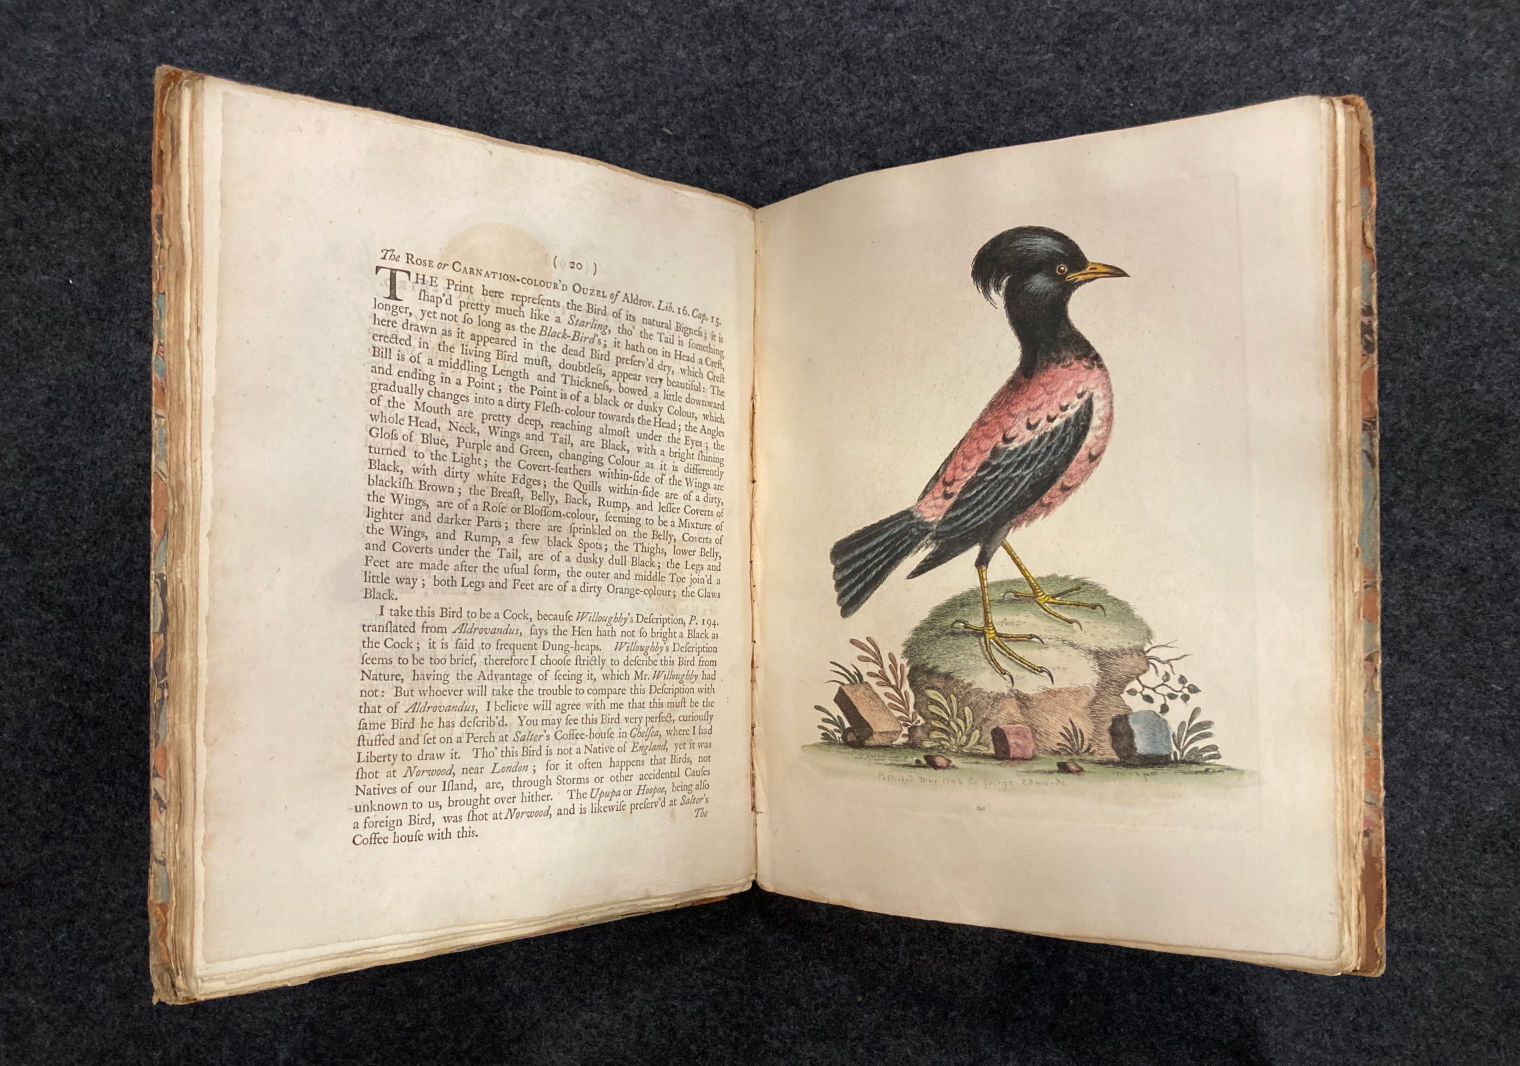 Book on a black background open to a page showing a black and red bird and text about the Rose or Carnation-colored Ouzel of Aldrov